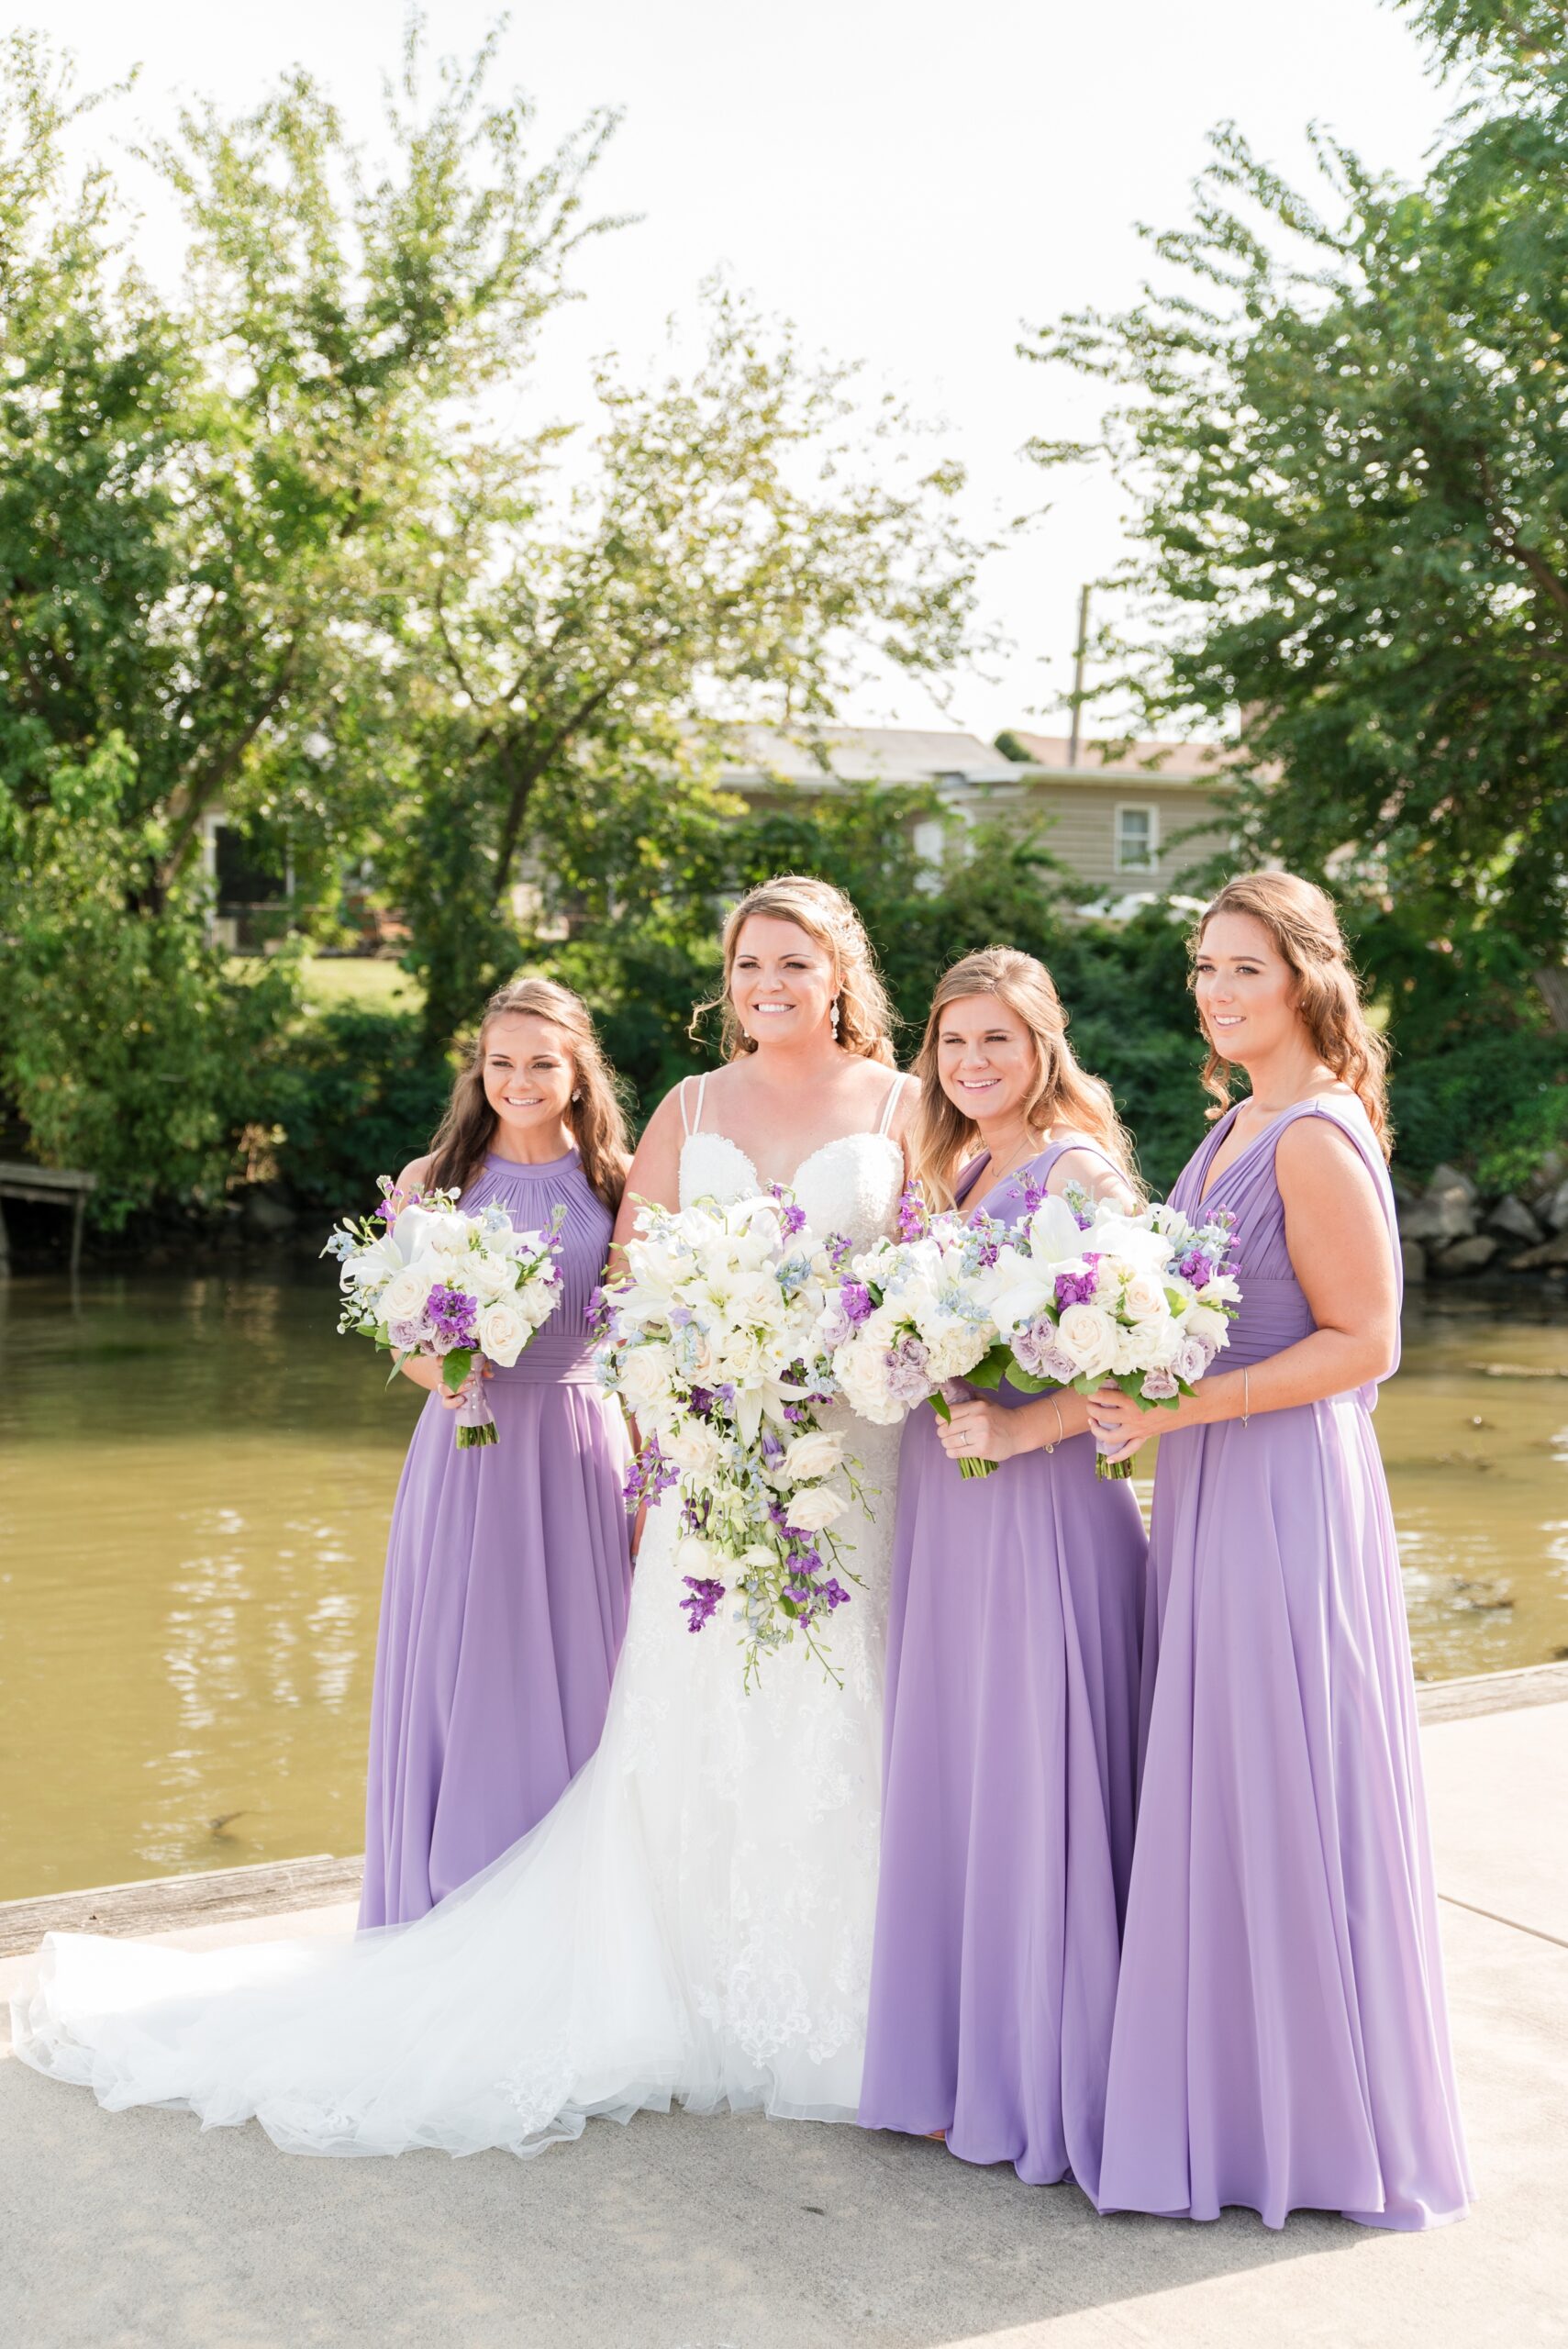 A bride holds her bouquet with her bridesmaids in matching dresses